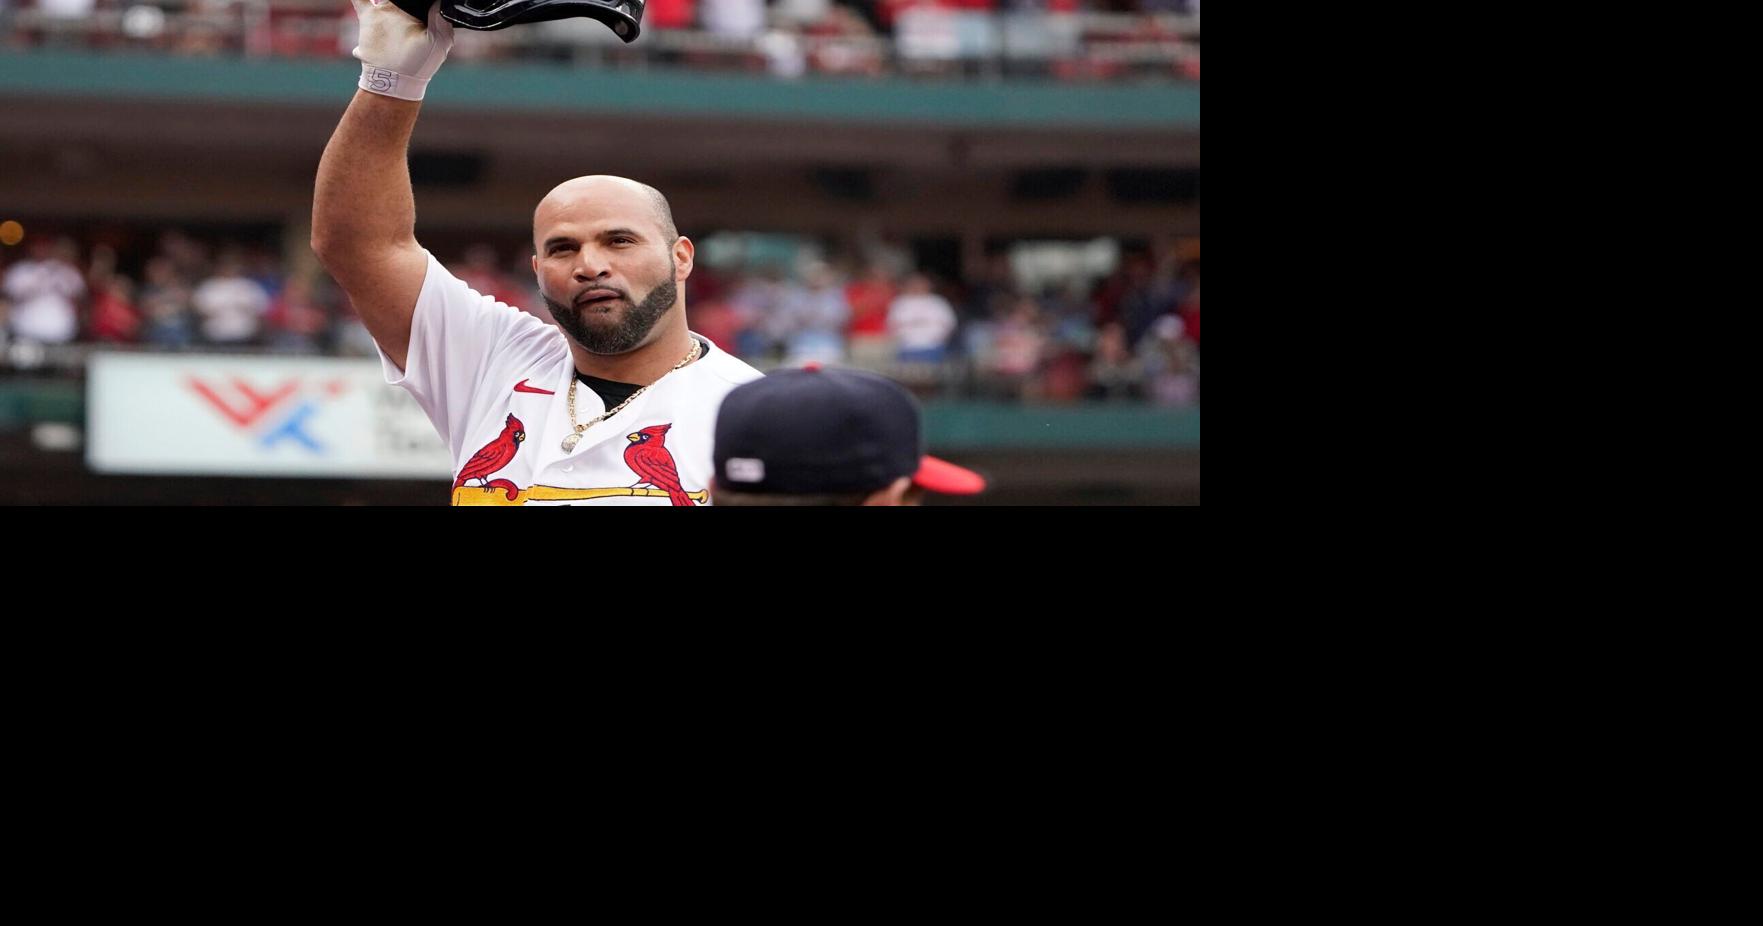 Albert Pujols looks at ARod's record eye to eye with homer 696, will he  retire in the top 3?